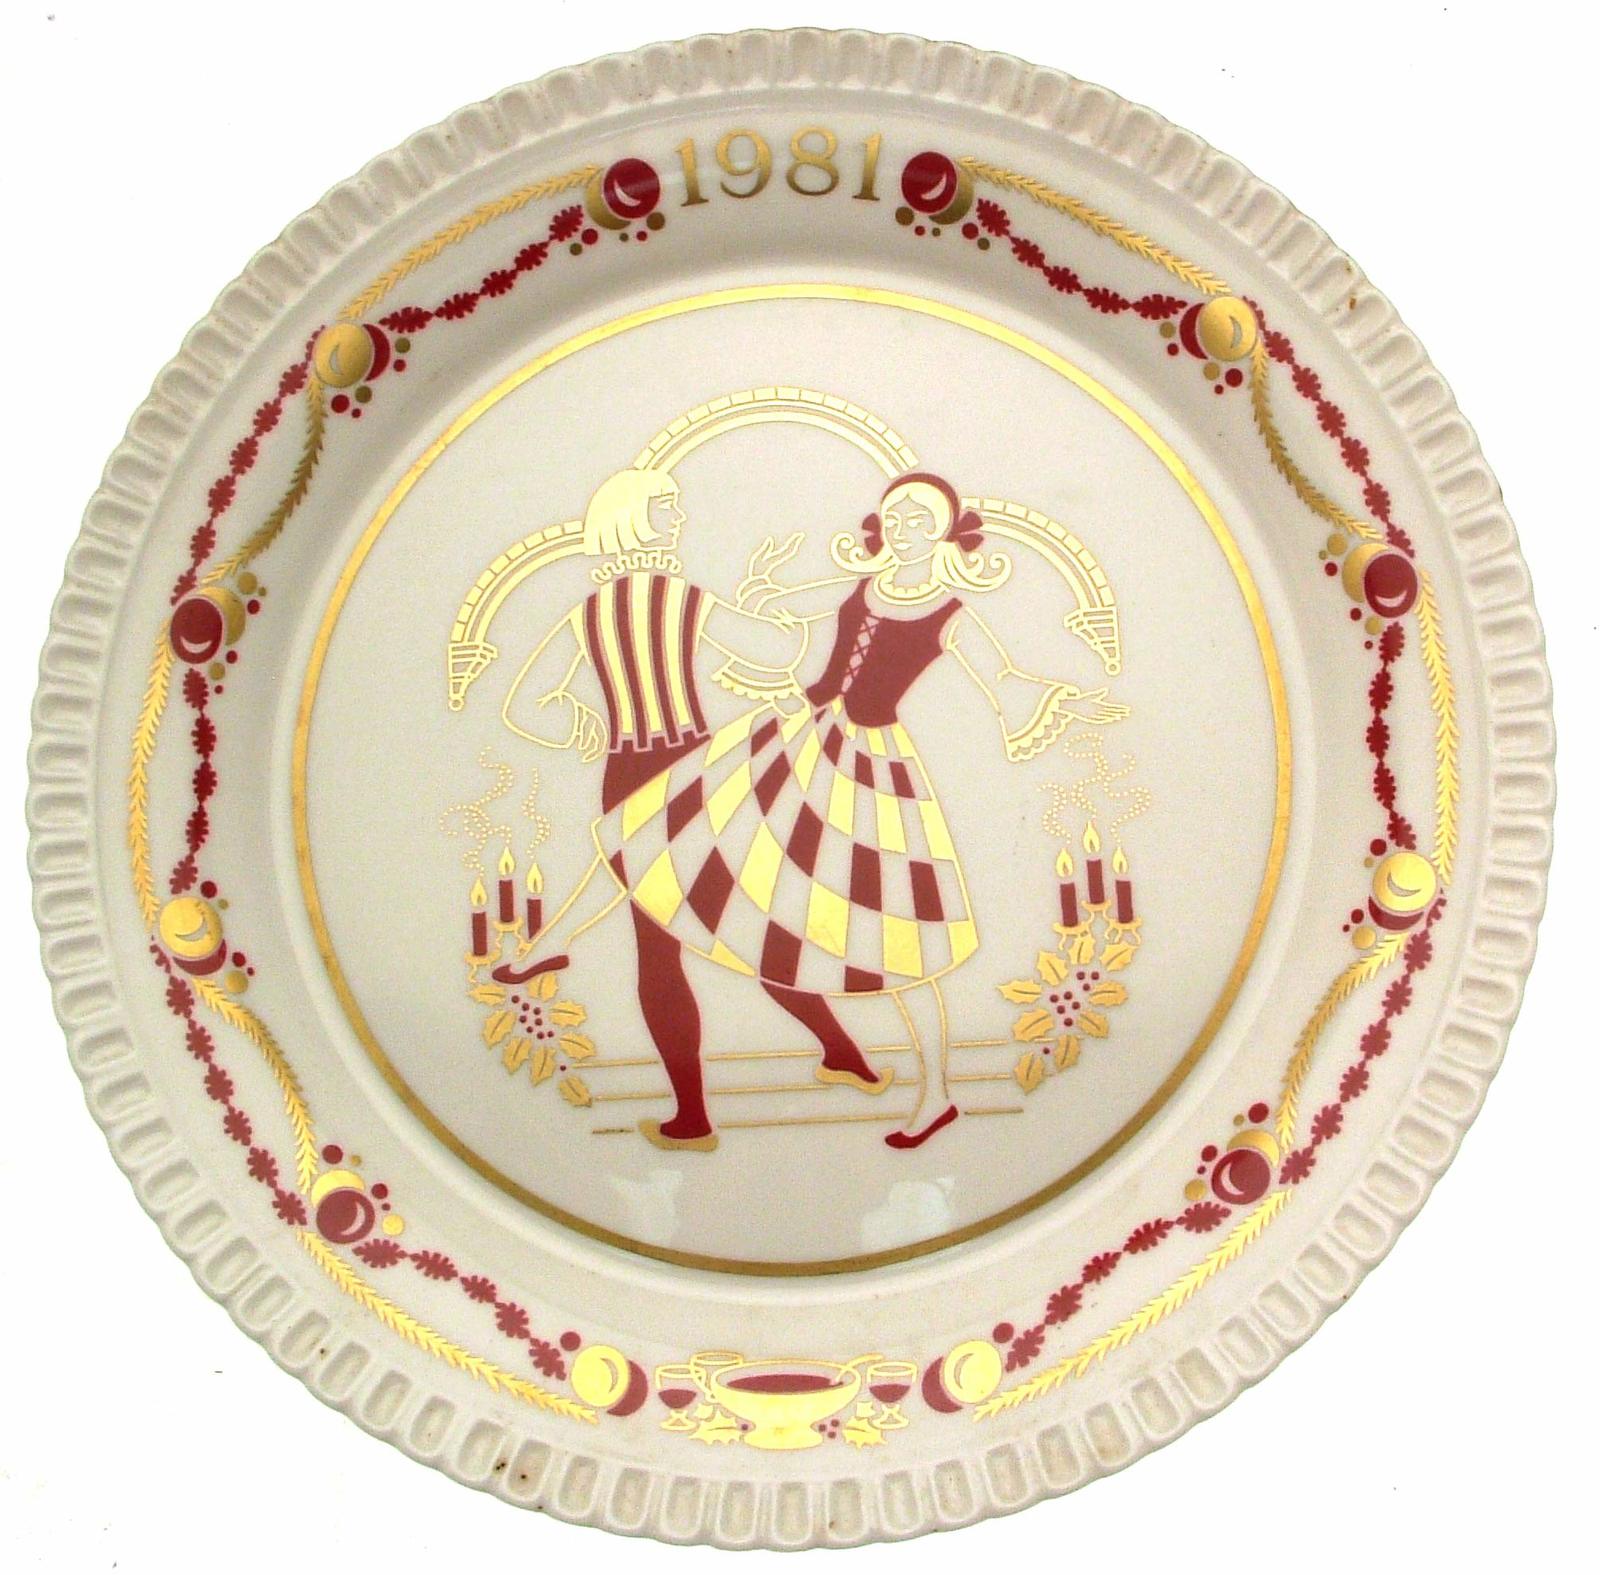 Spode Christmas Plate for 1981 - Make we Merry - CP1079 - $36.58